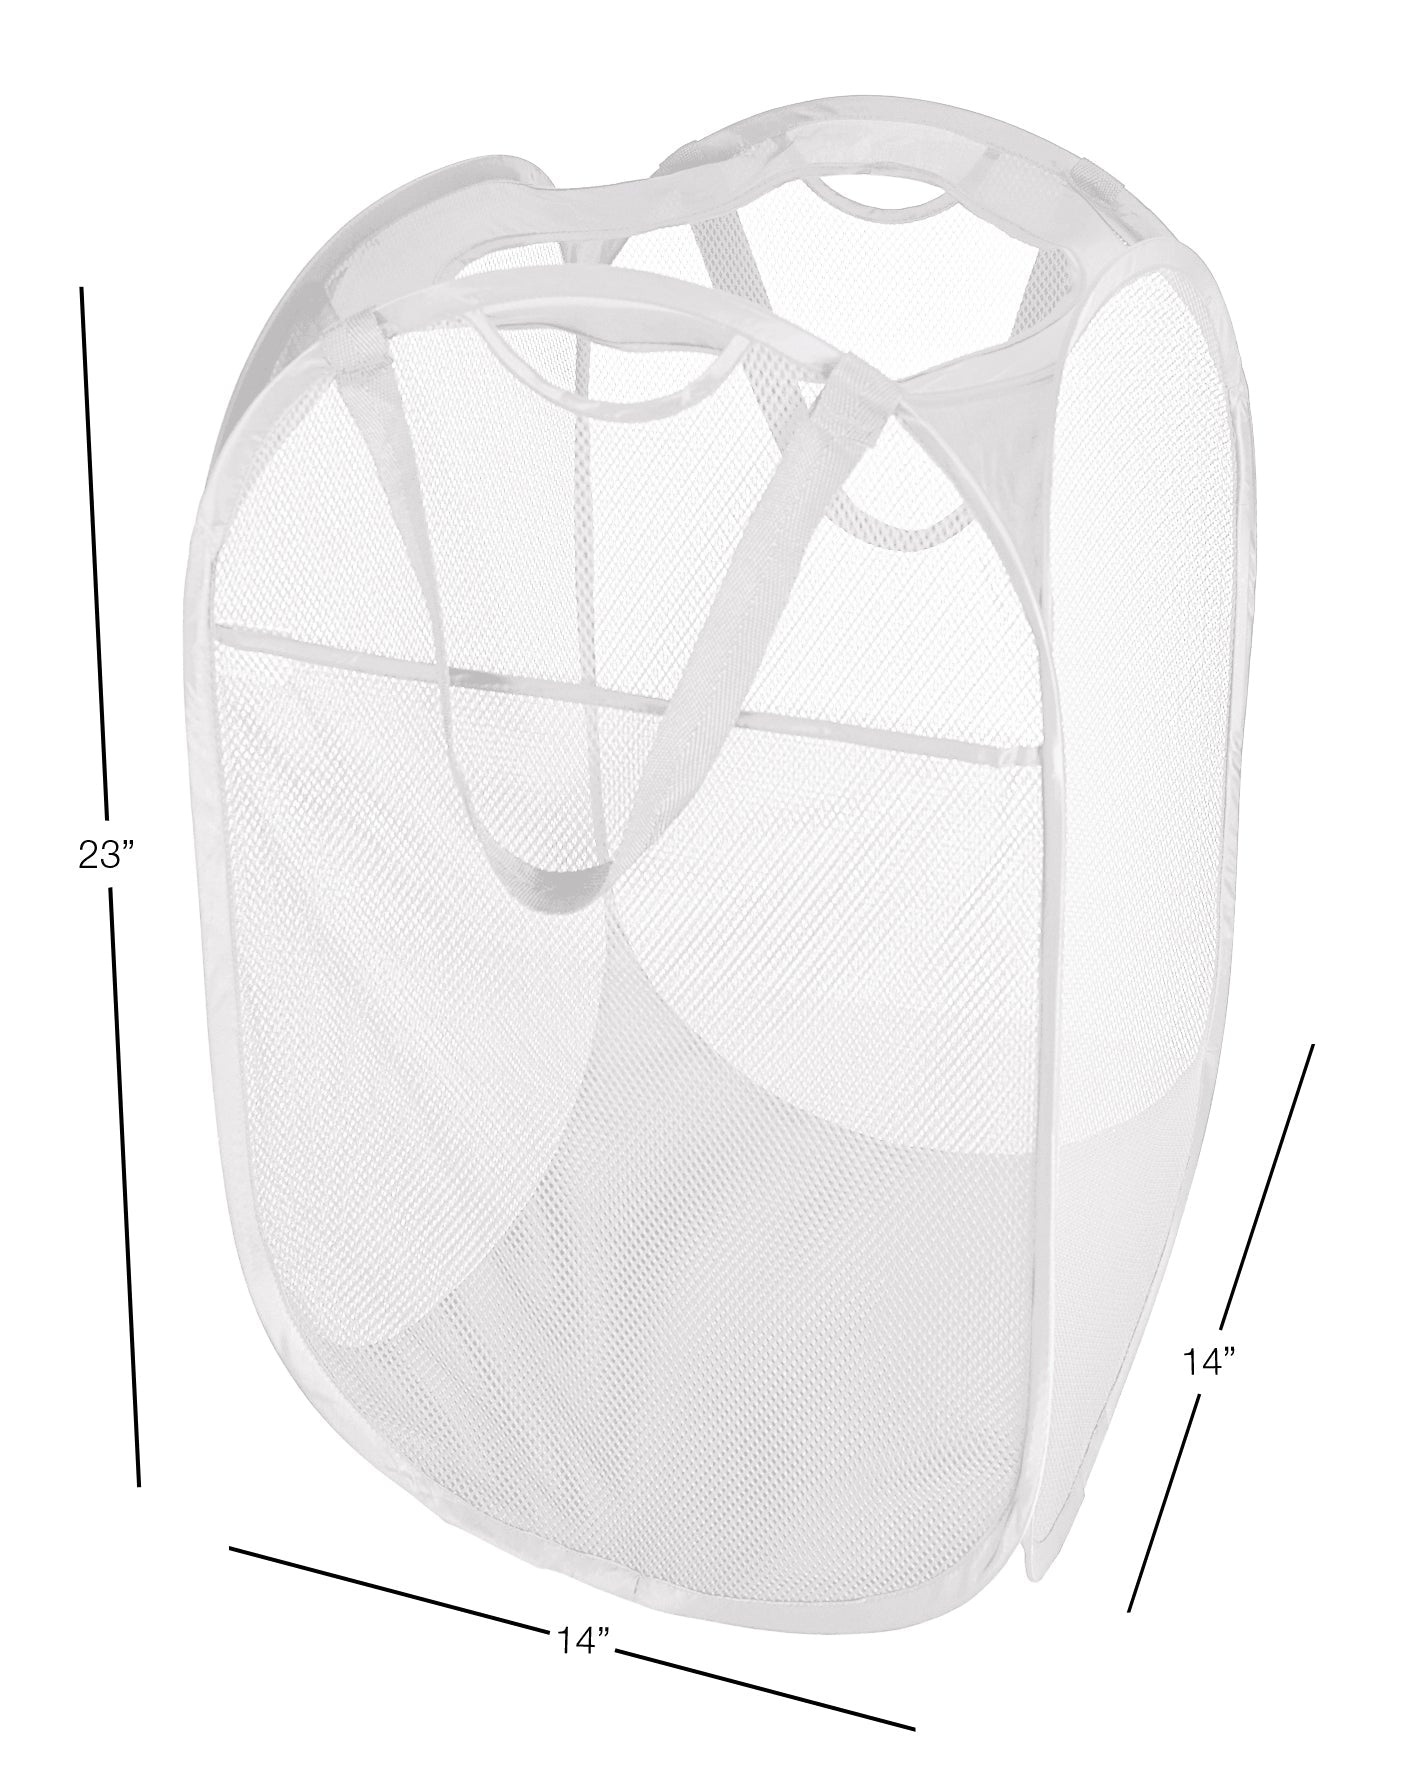 Deluxe Mesh Pop Up Square Laundry Hamper with Side Pocket and Handles - VentilAir Fabric - Collapsible Smart Design® 19